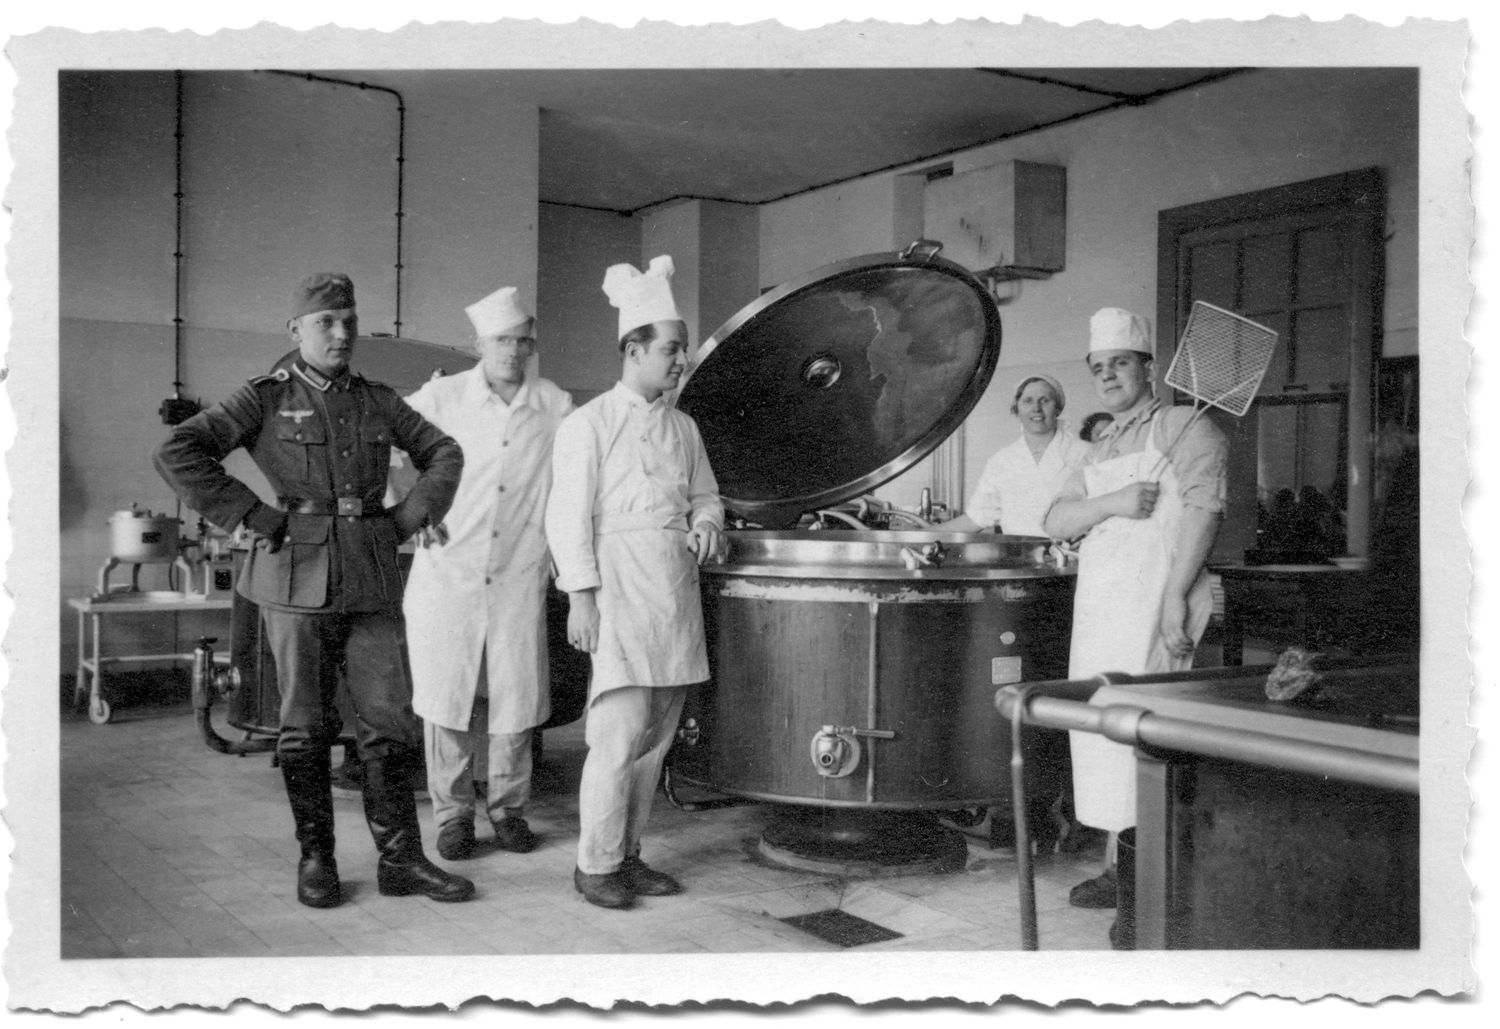 INDUSTRIAL DEEP-FRYER: Seen within a spic-and-span, state-of-the-art military base kitchen, the staff poses proudly by one of their massive cooking vats. A spigot is visible from which the grease is released into a floor trap for recycling. Grease was a component used in the production of explosives. 